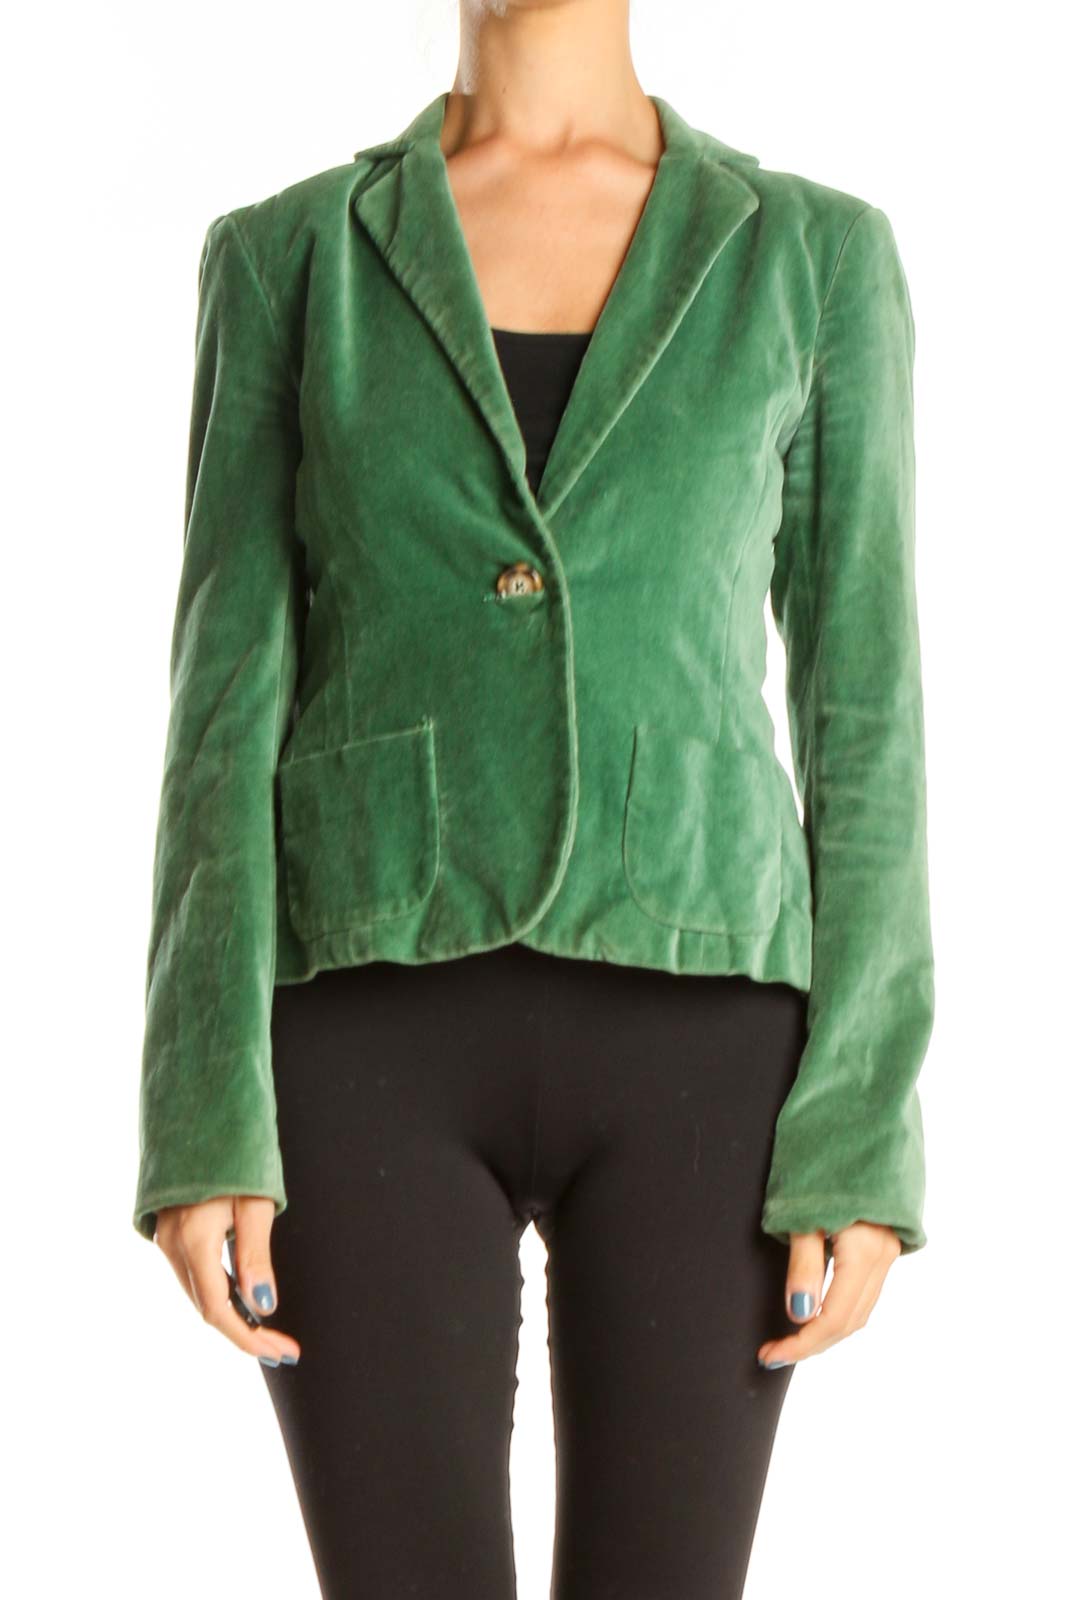 Green Velour Jacket Front